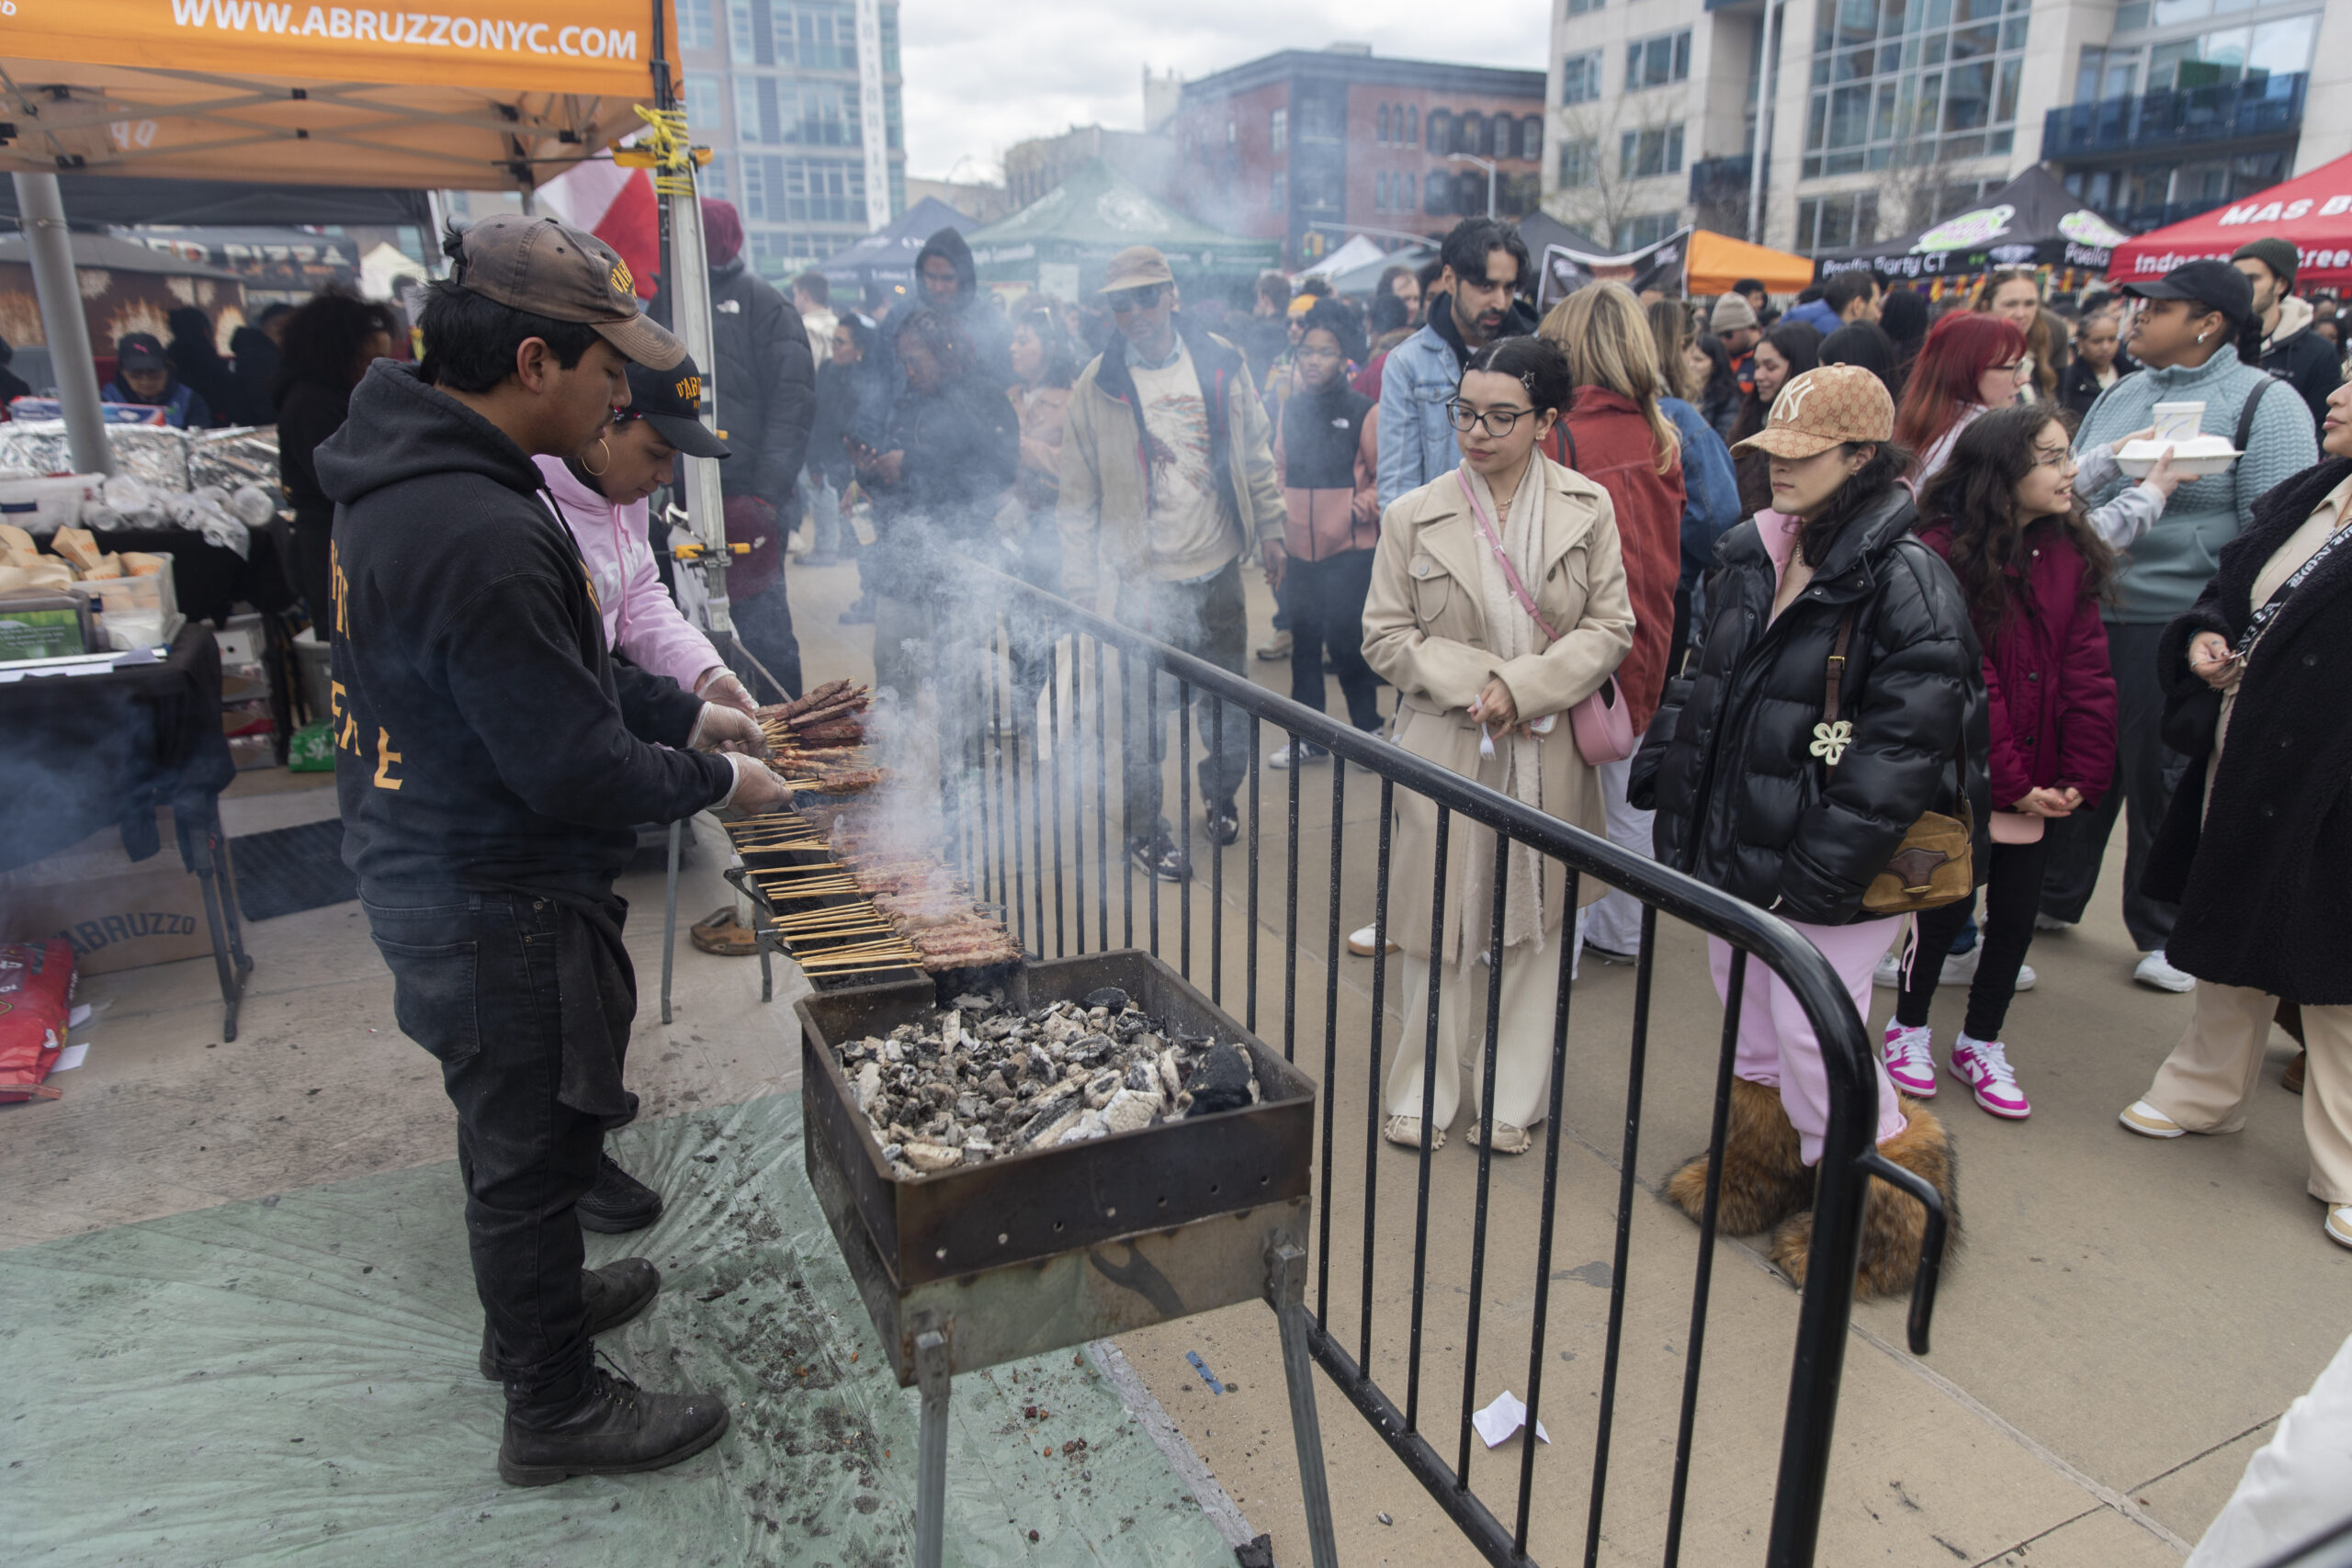 Grilling in front of D’Abruzzo Street Food at Williamsburg Smorgasburg.